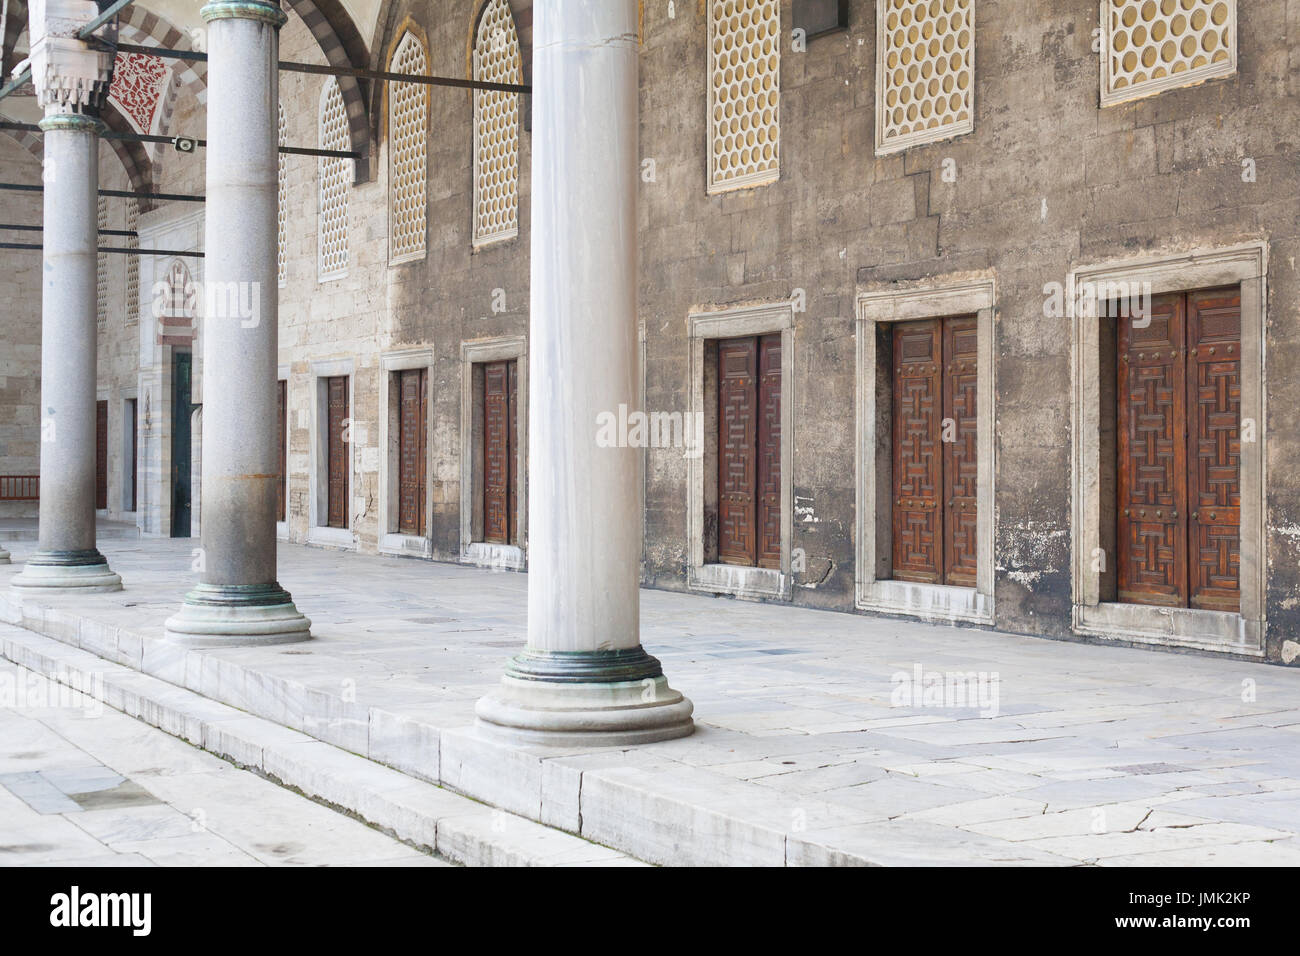 Portico with marble columns and doors in a row in the courtyard of an ancient mosque Stock Photo